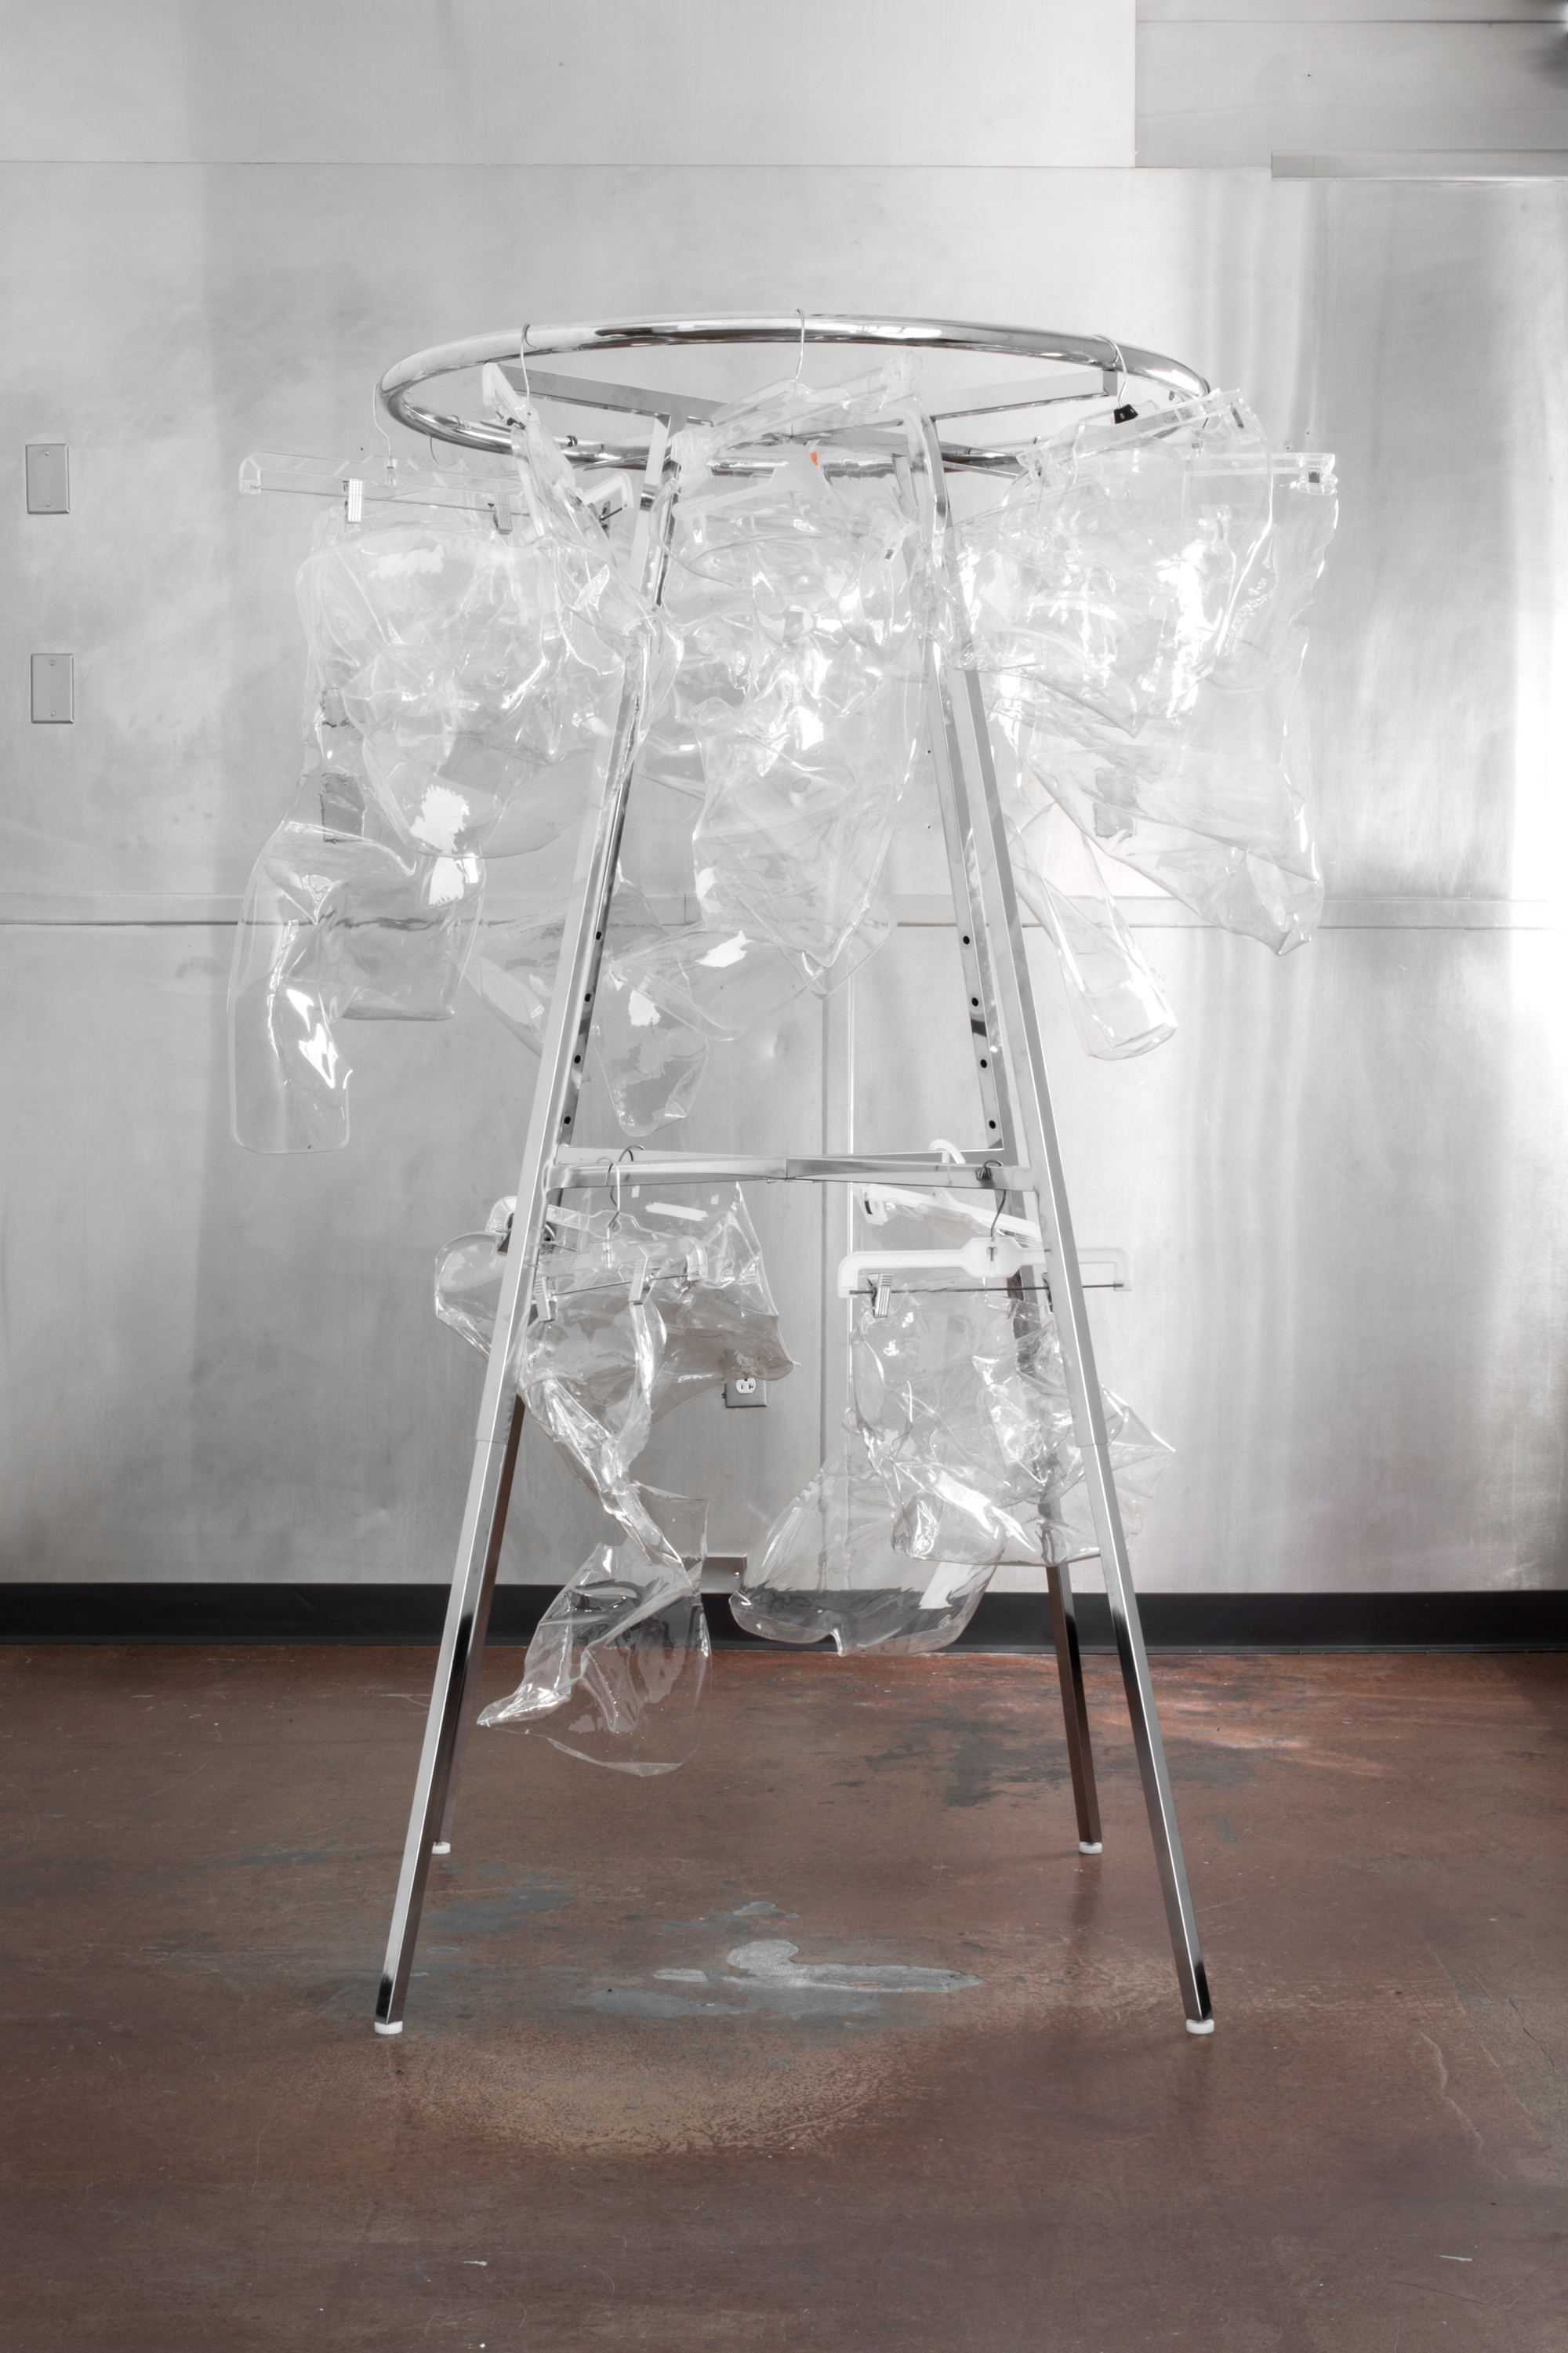 PROMISE OF HAPPINESS   |   SHOPPING RACK, PLASTIC BODY FORMS, HANGERS   |   8'X3.5'X3'